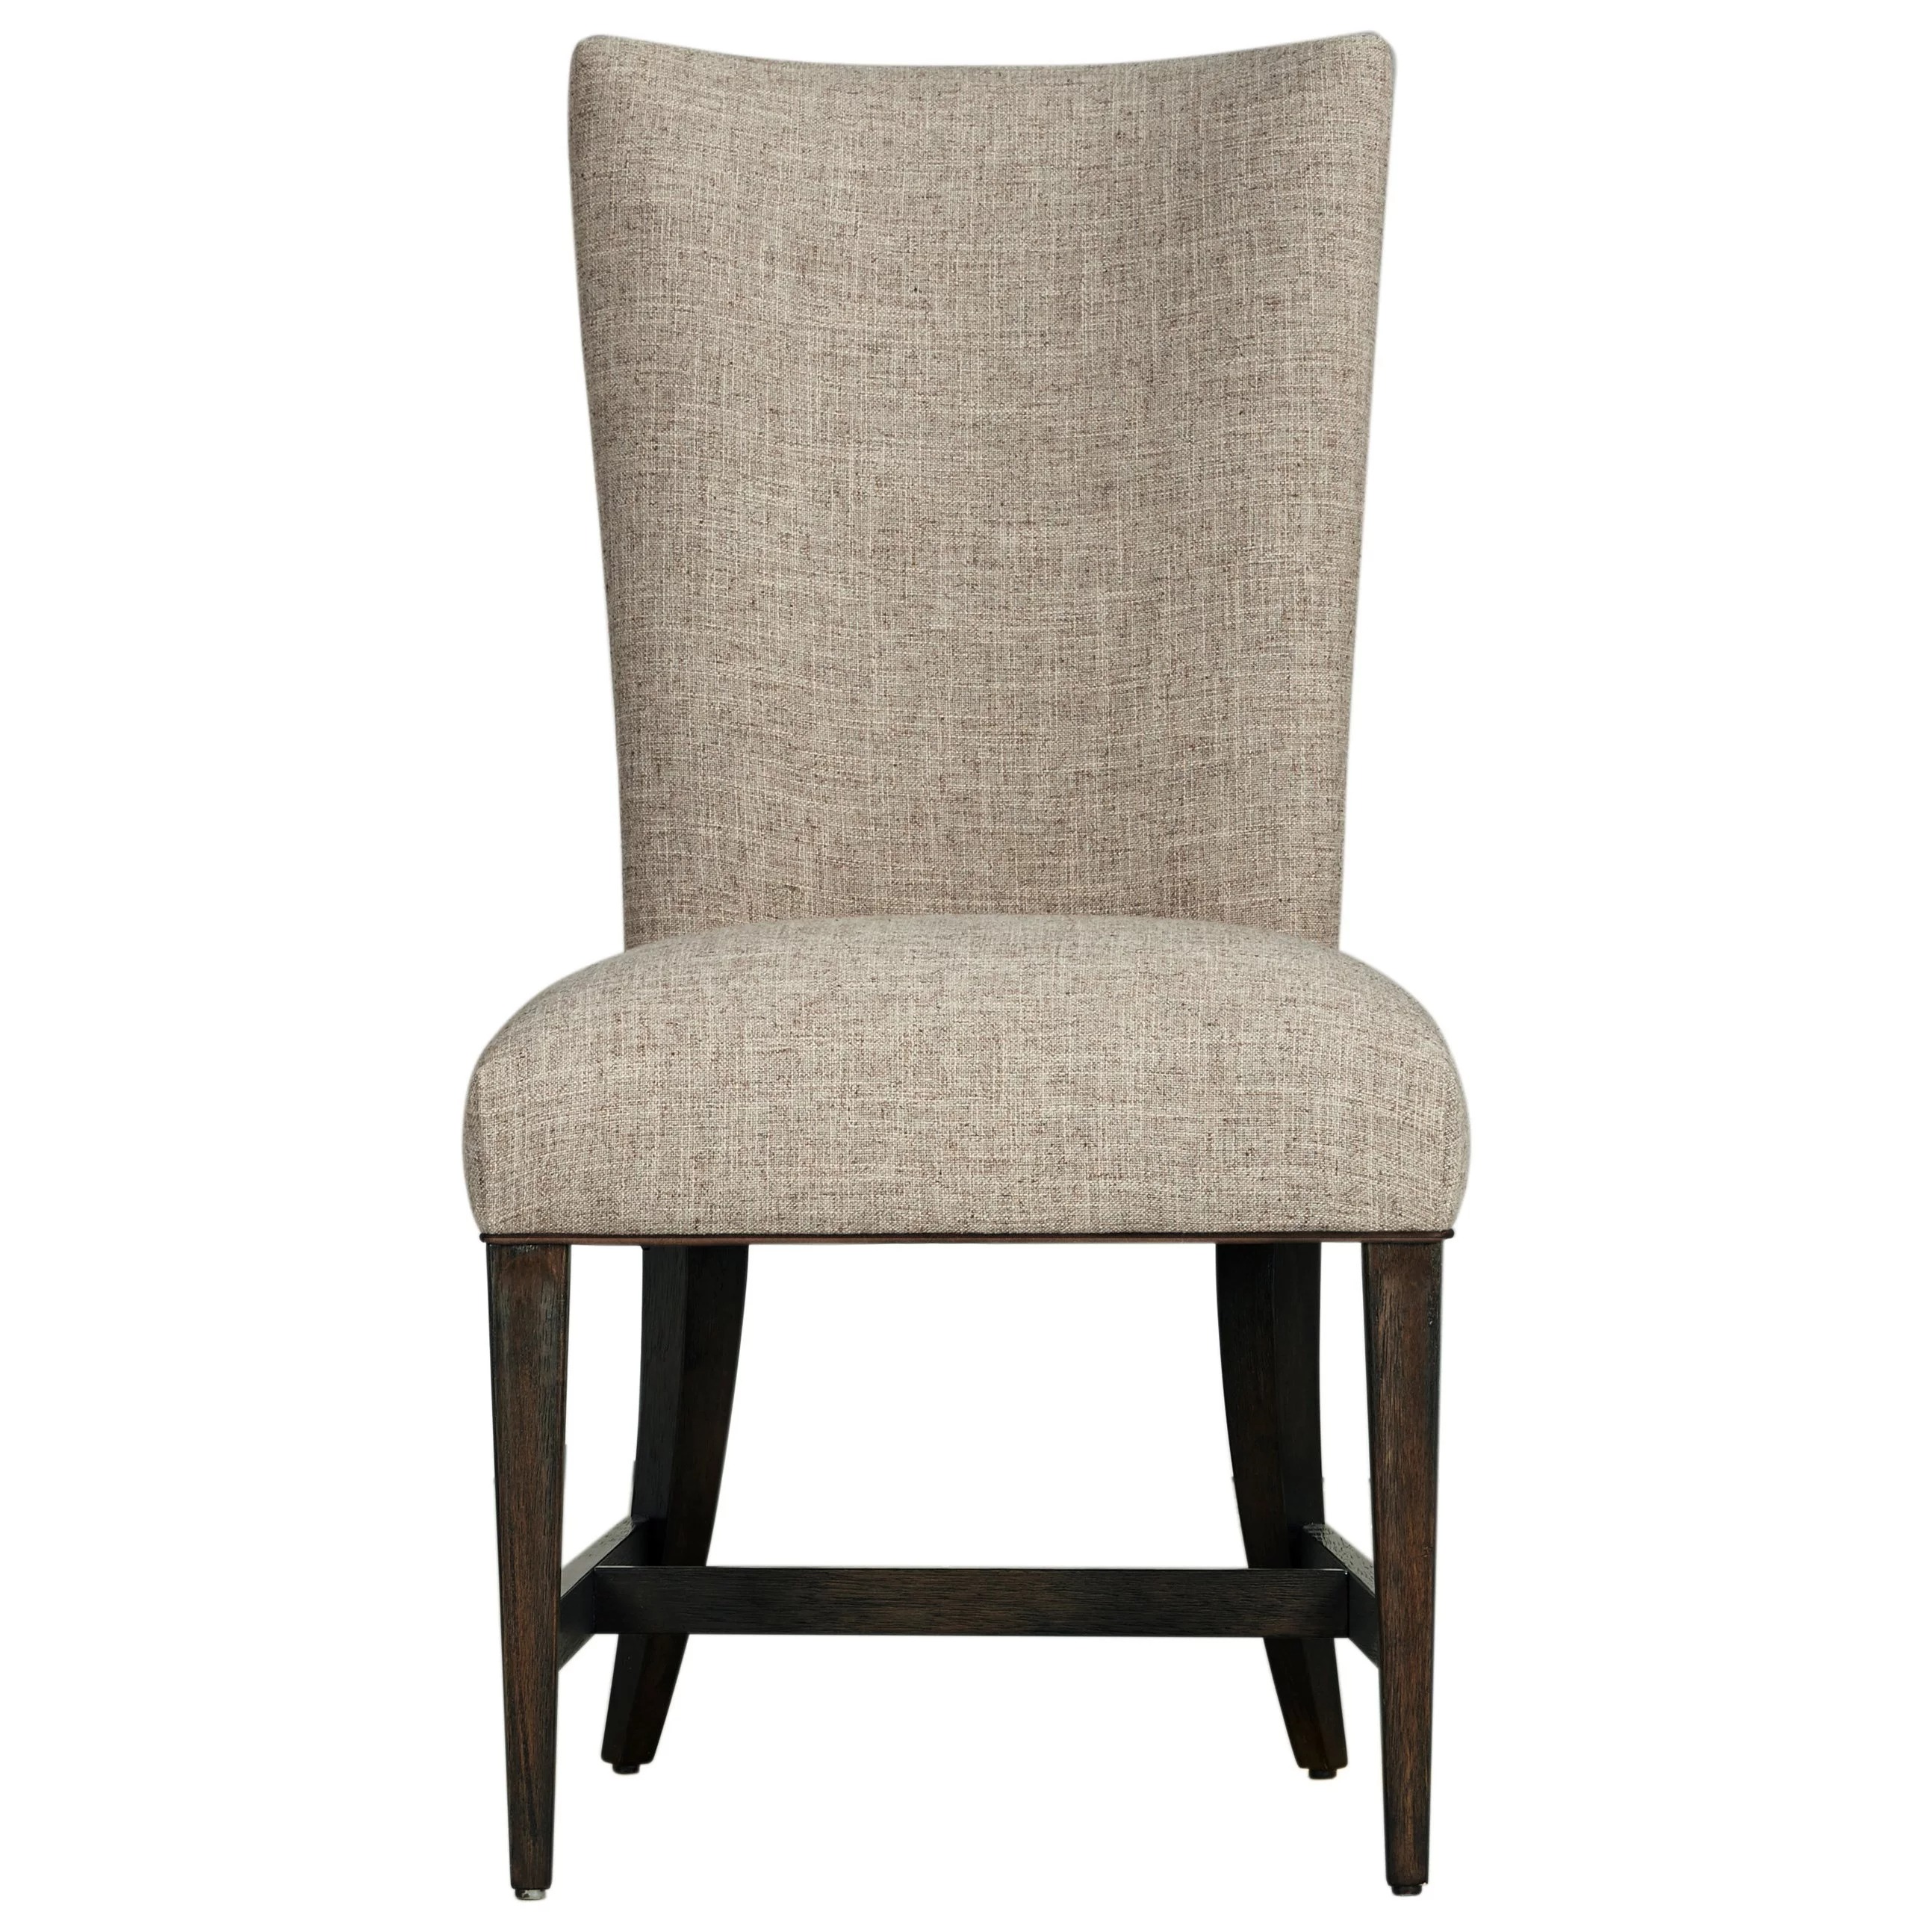 WOODWRIGHT - RACINE UPH SIDE CHAIR